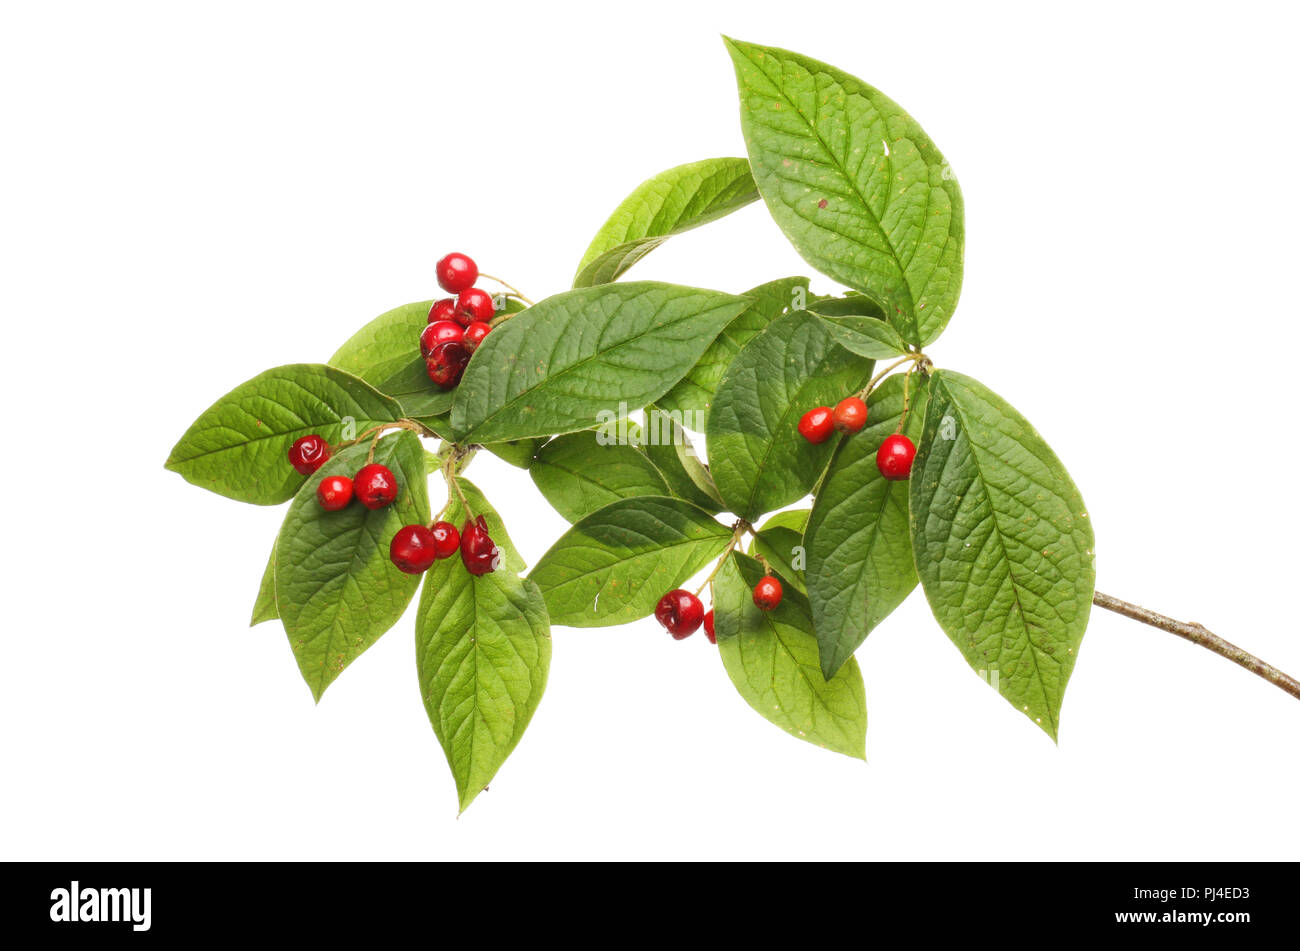 Cotoneaster leaves and berries isolated against white Stock Photo